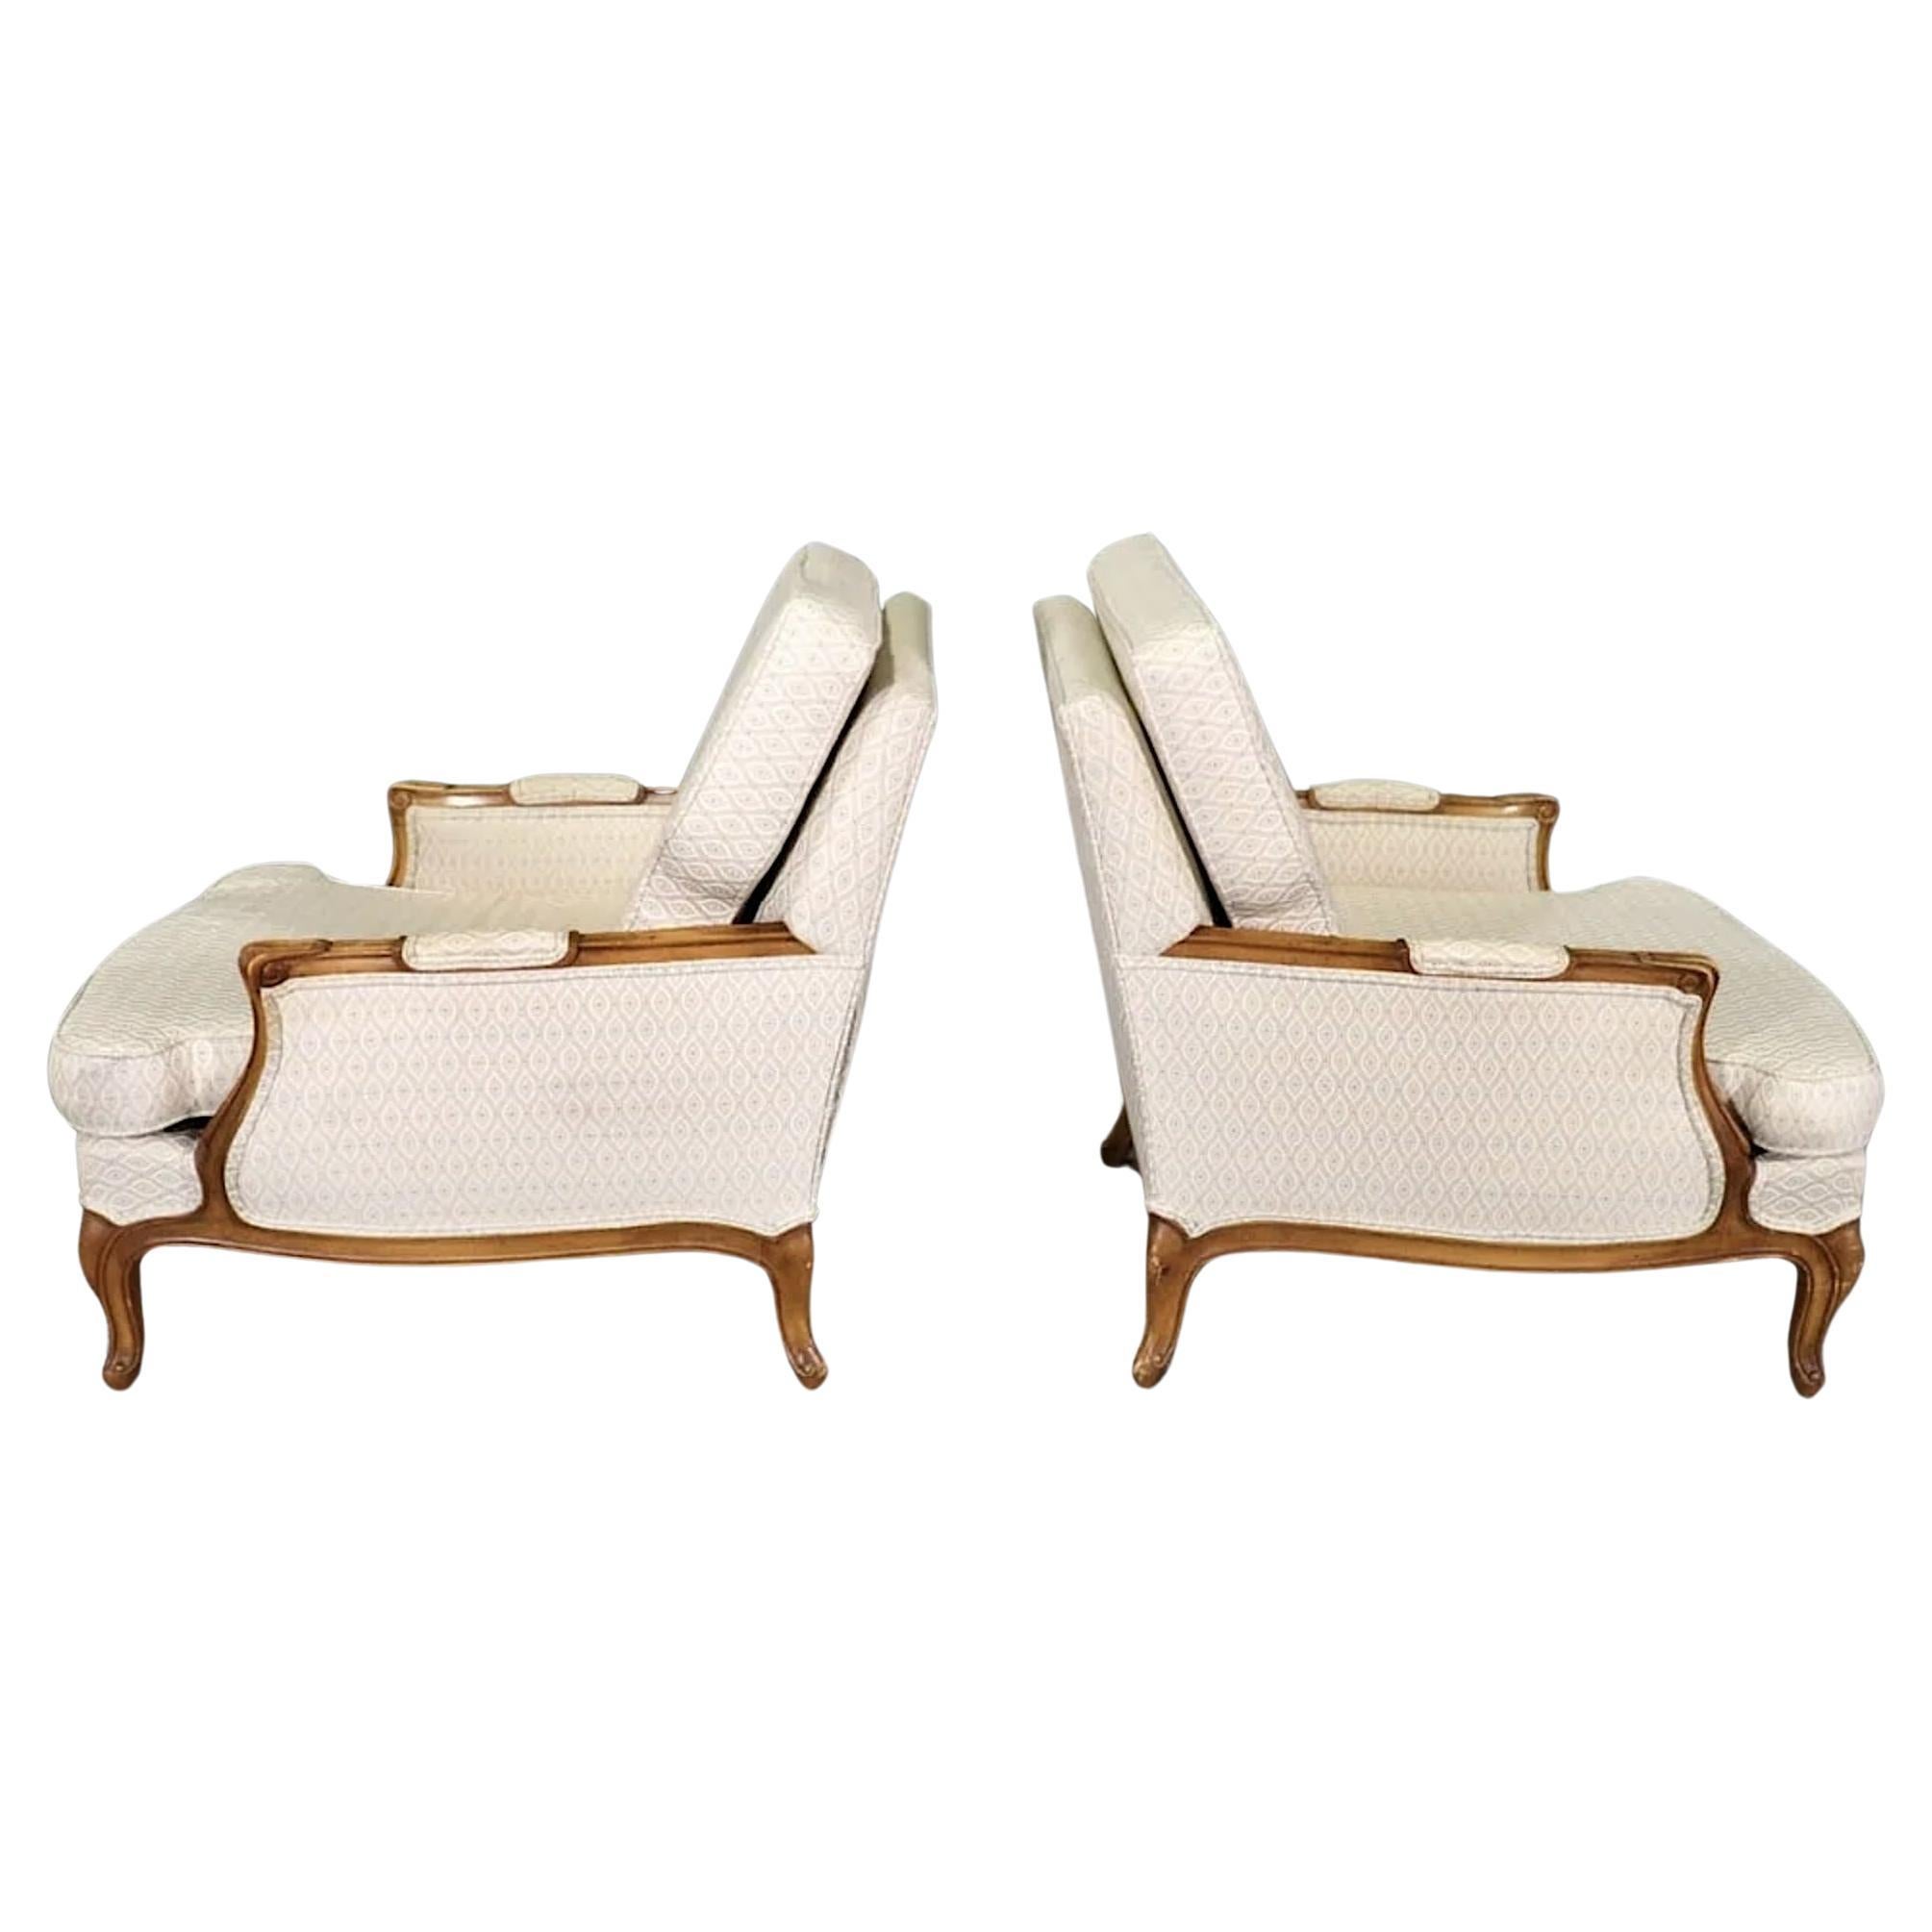 French-style Bergère Chairs For Sale